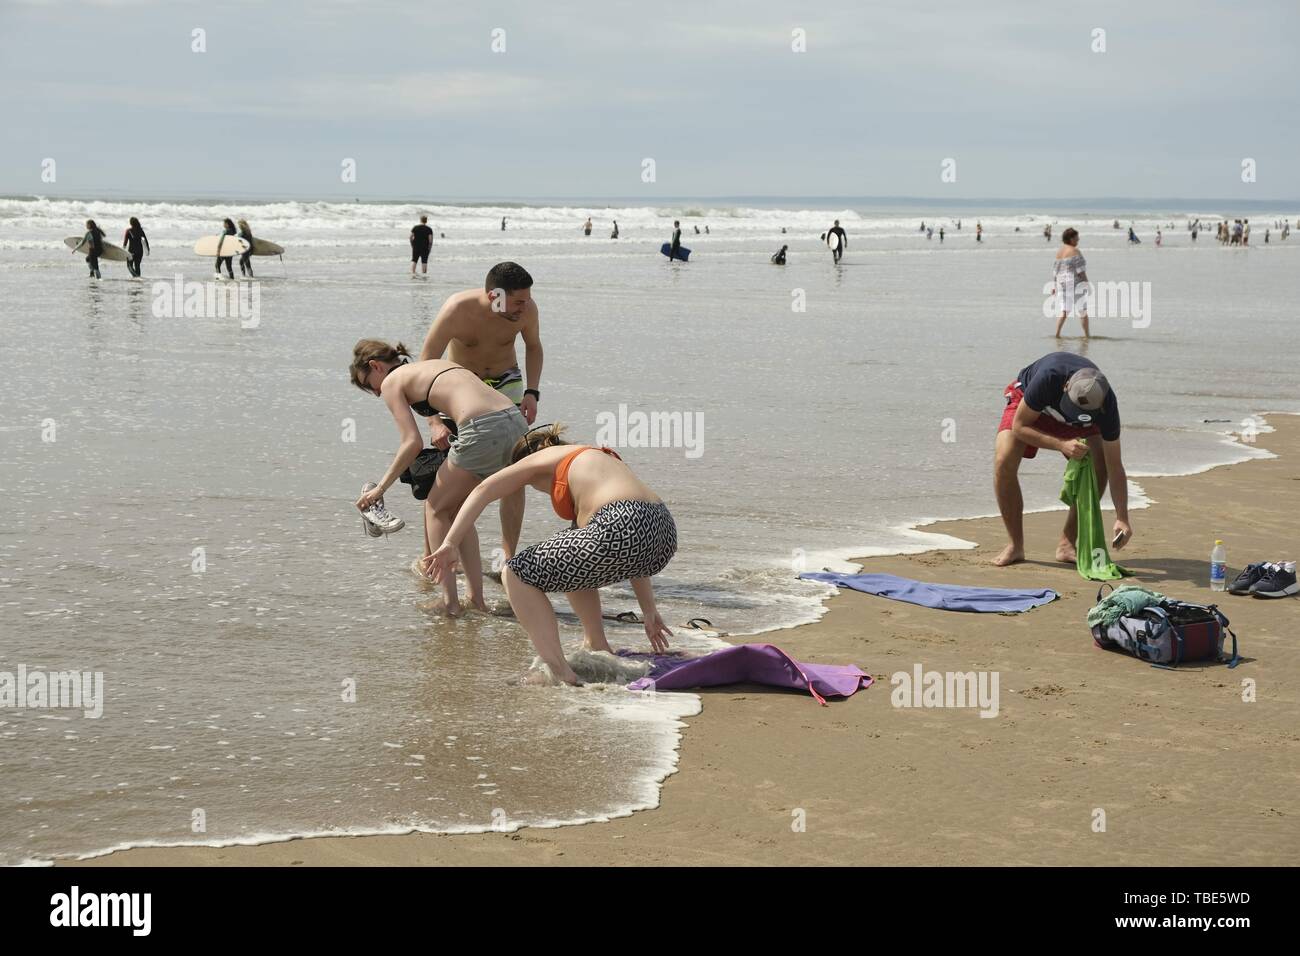 Gower, Swansea, Wales, UK. 1st June 2019. Weather: The racing tide caught these sunbathers by surprise. Beachgoers enjoyed a warm day with some cloud and spells of hazy sunshine at Llangennith beach on the Gower peninsula, near Swansea, South Wales. Cloud is forecast to build overnight and rain is forecast. Credit: Gareth Llewelyn/Alamy Live News Stock Photo